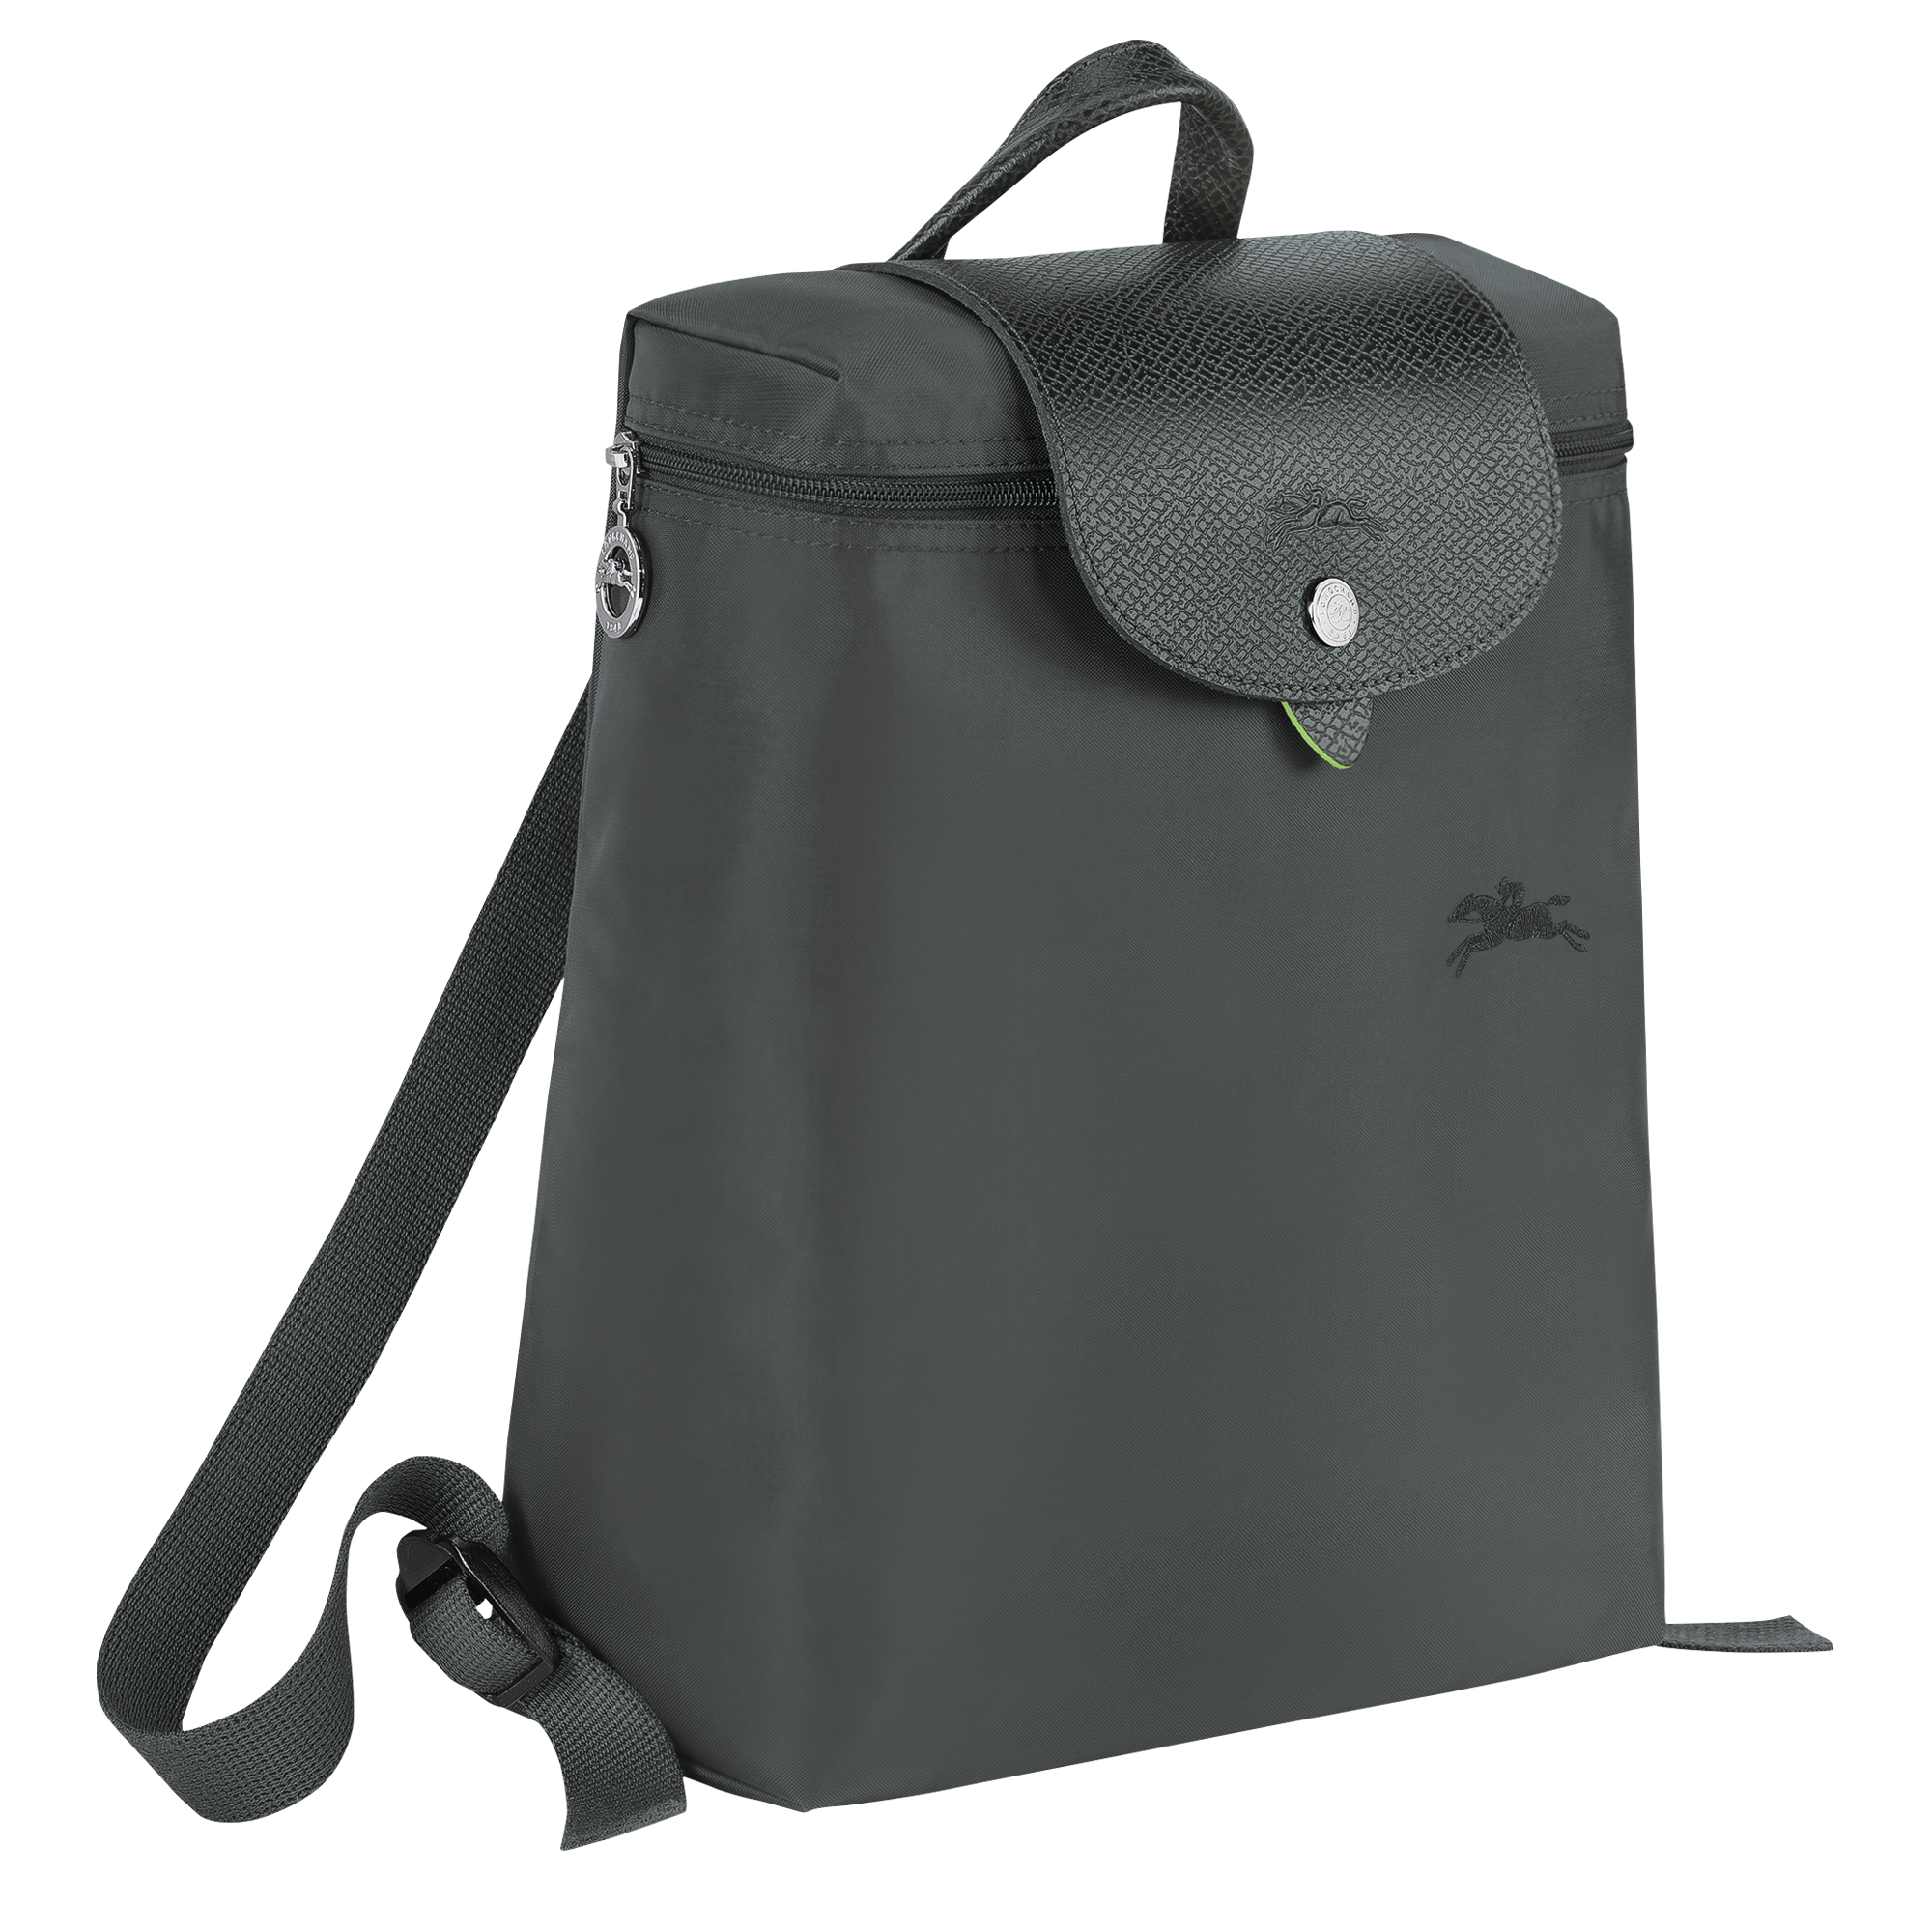 Le Pliage Green Backpack, Graphite